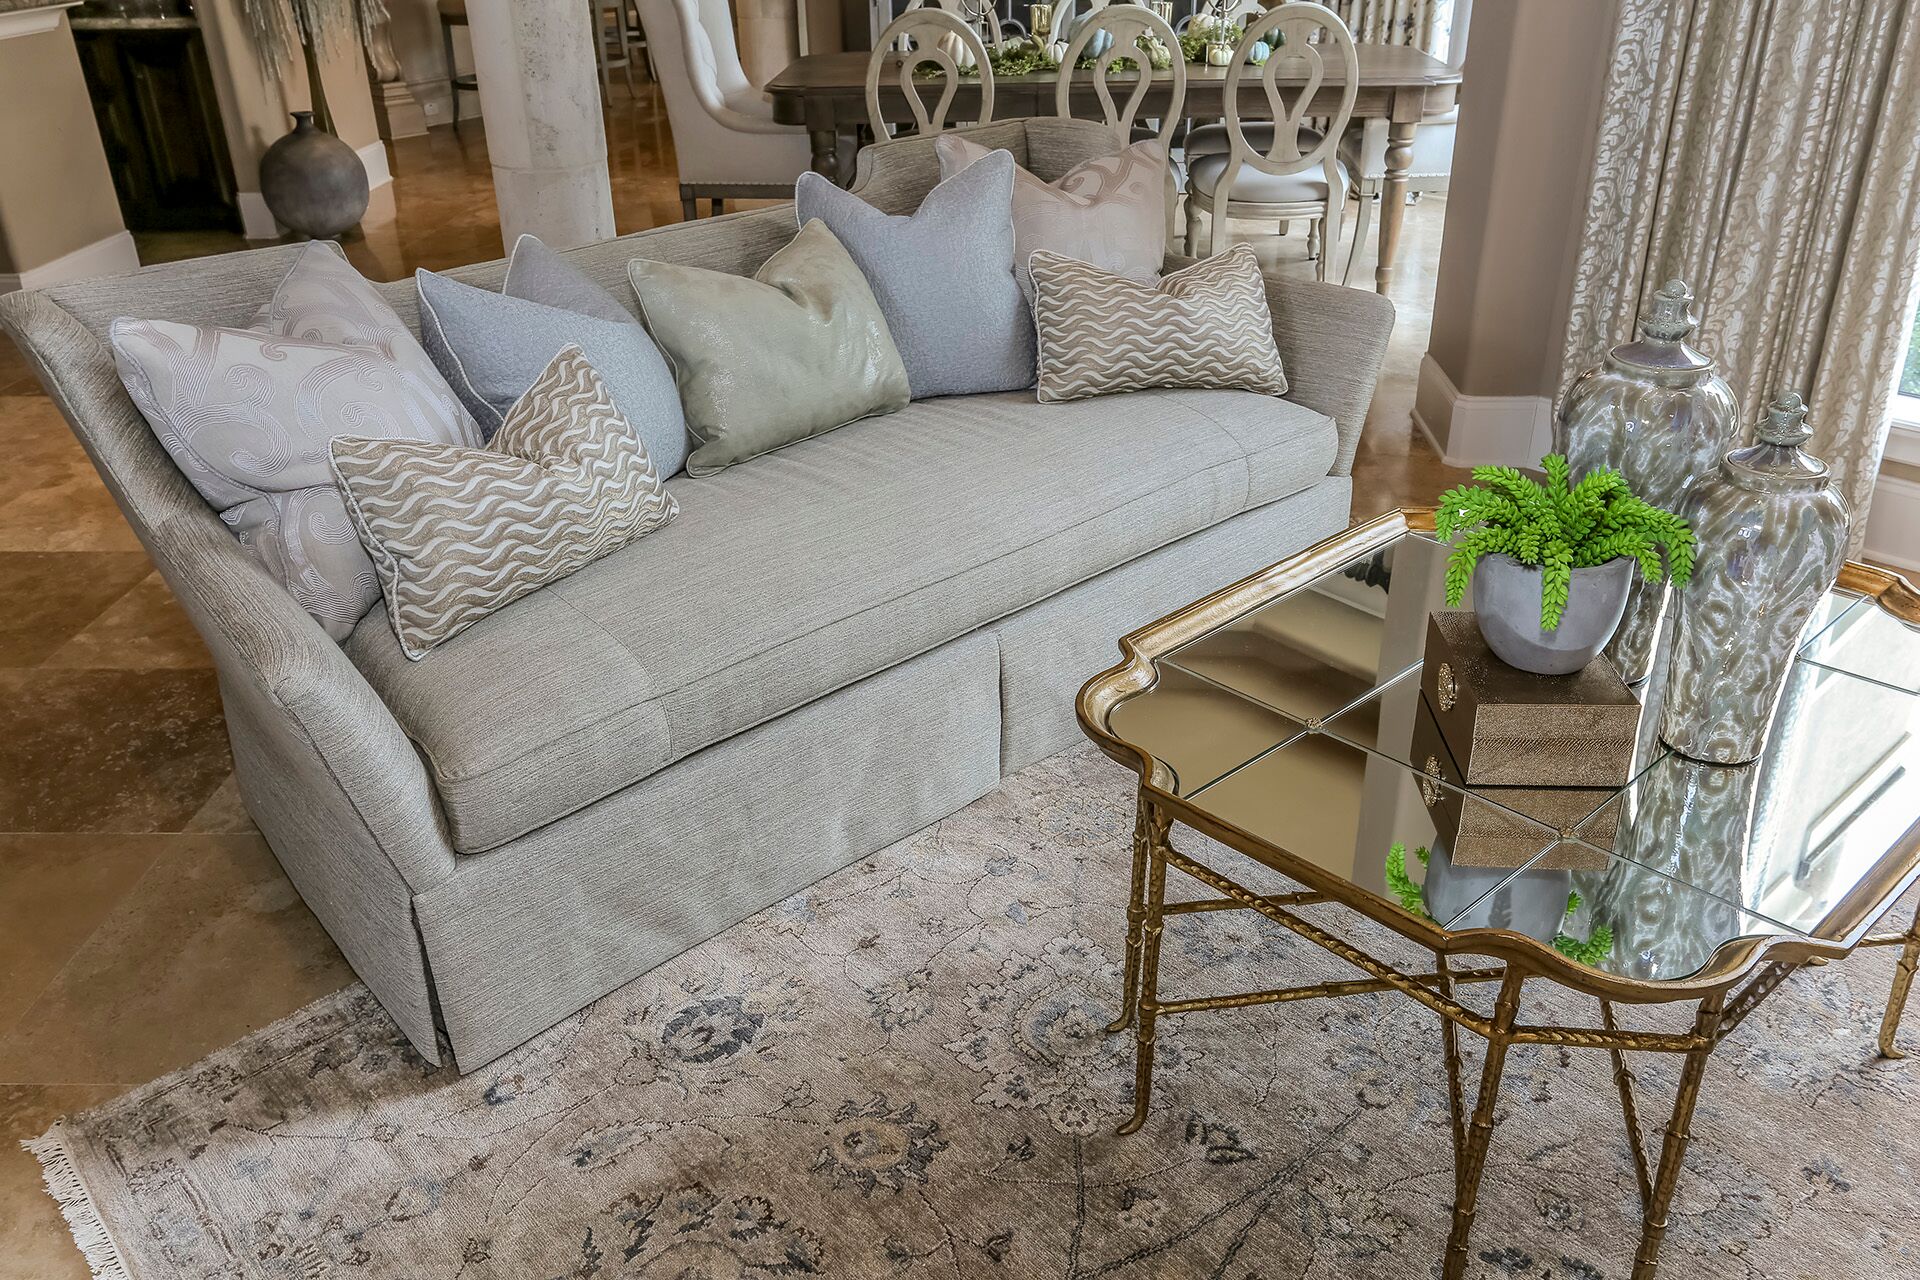 Getting Personal – How to Work with an Interior Designer